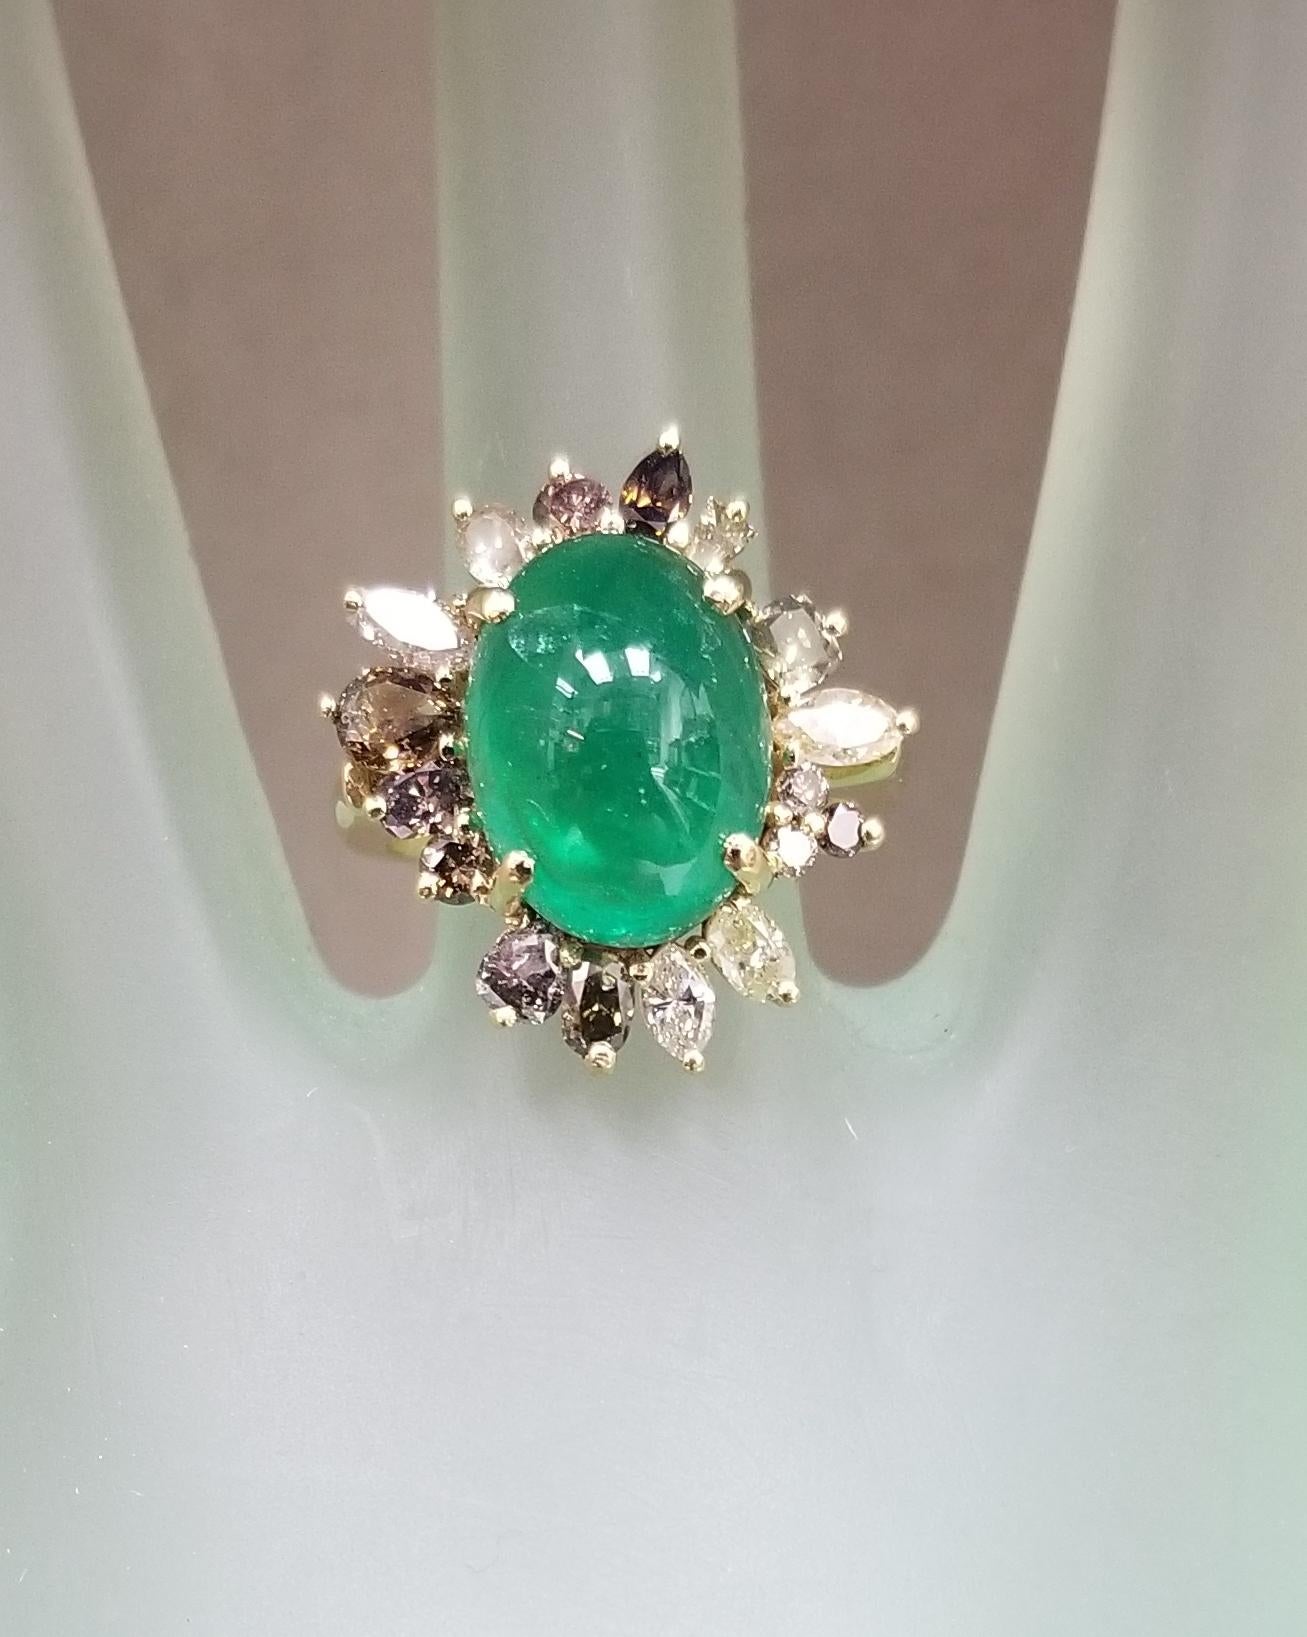 Natural White, Yellow and Brown Diamonds Surrounding a Emerald 3